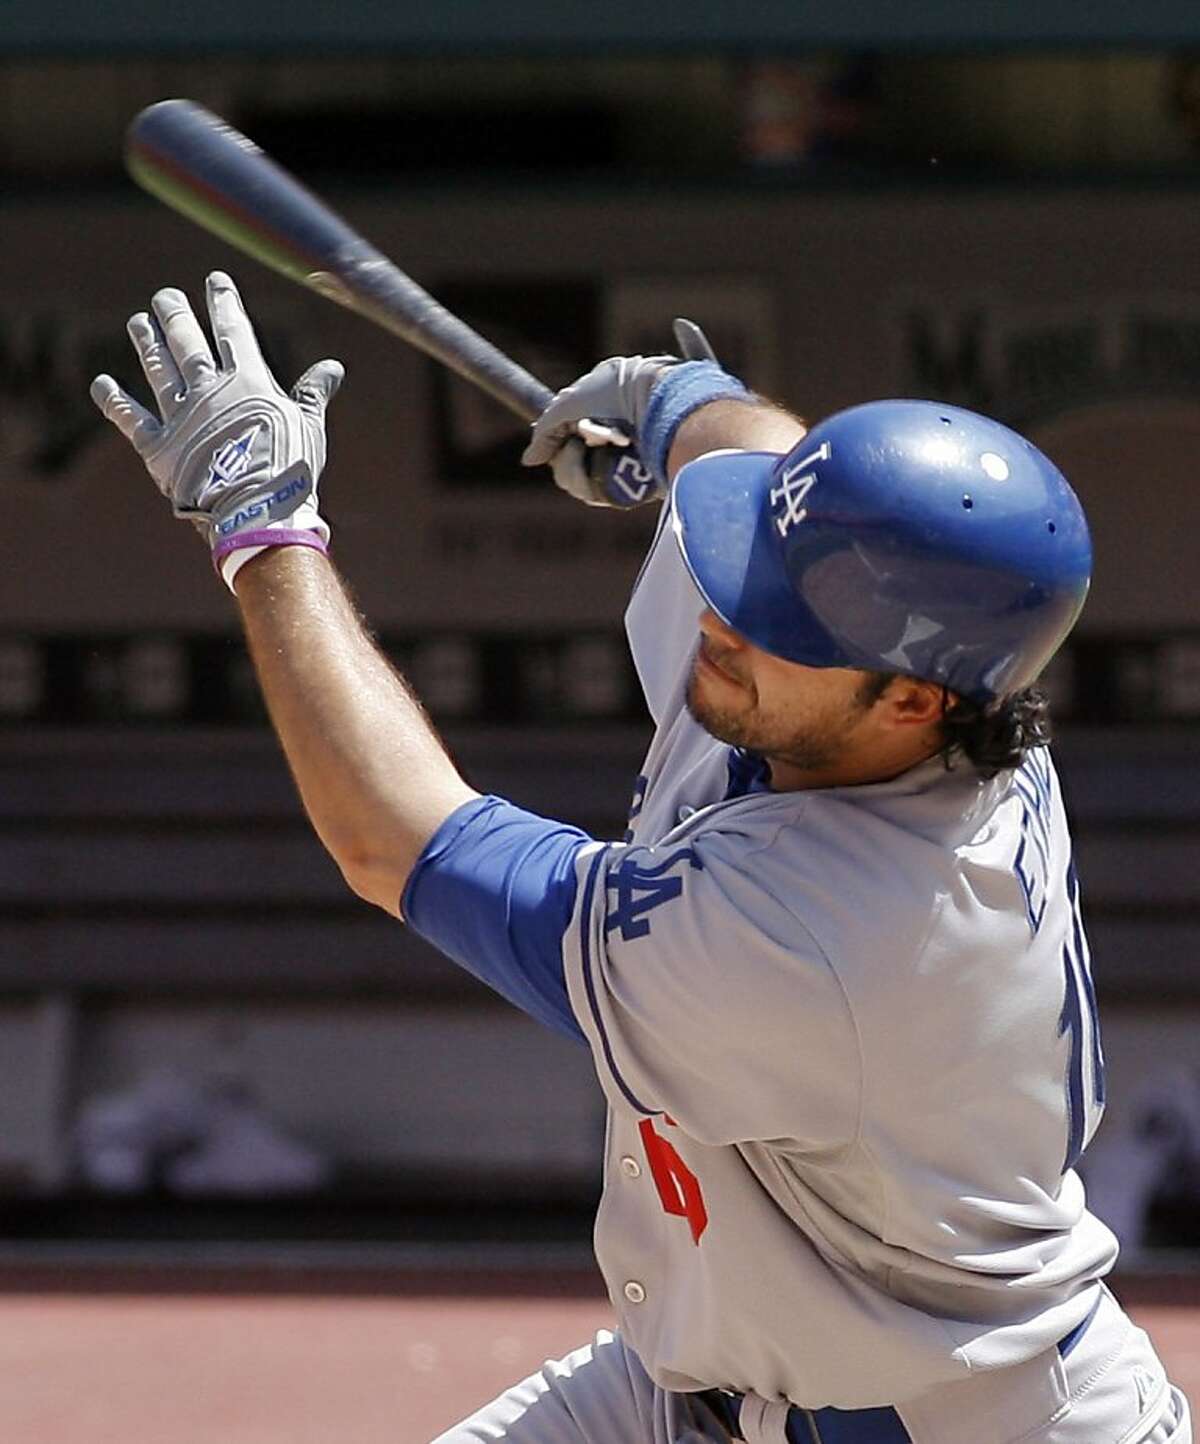 A Day in the Life with Andre Ethier 